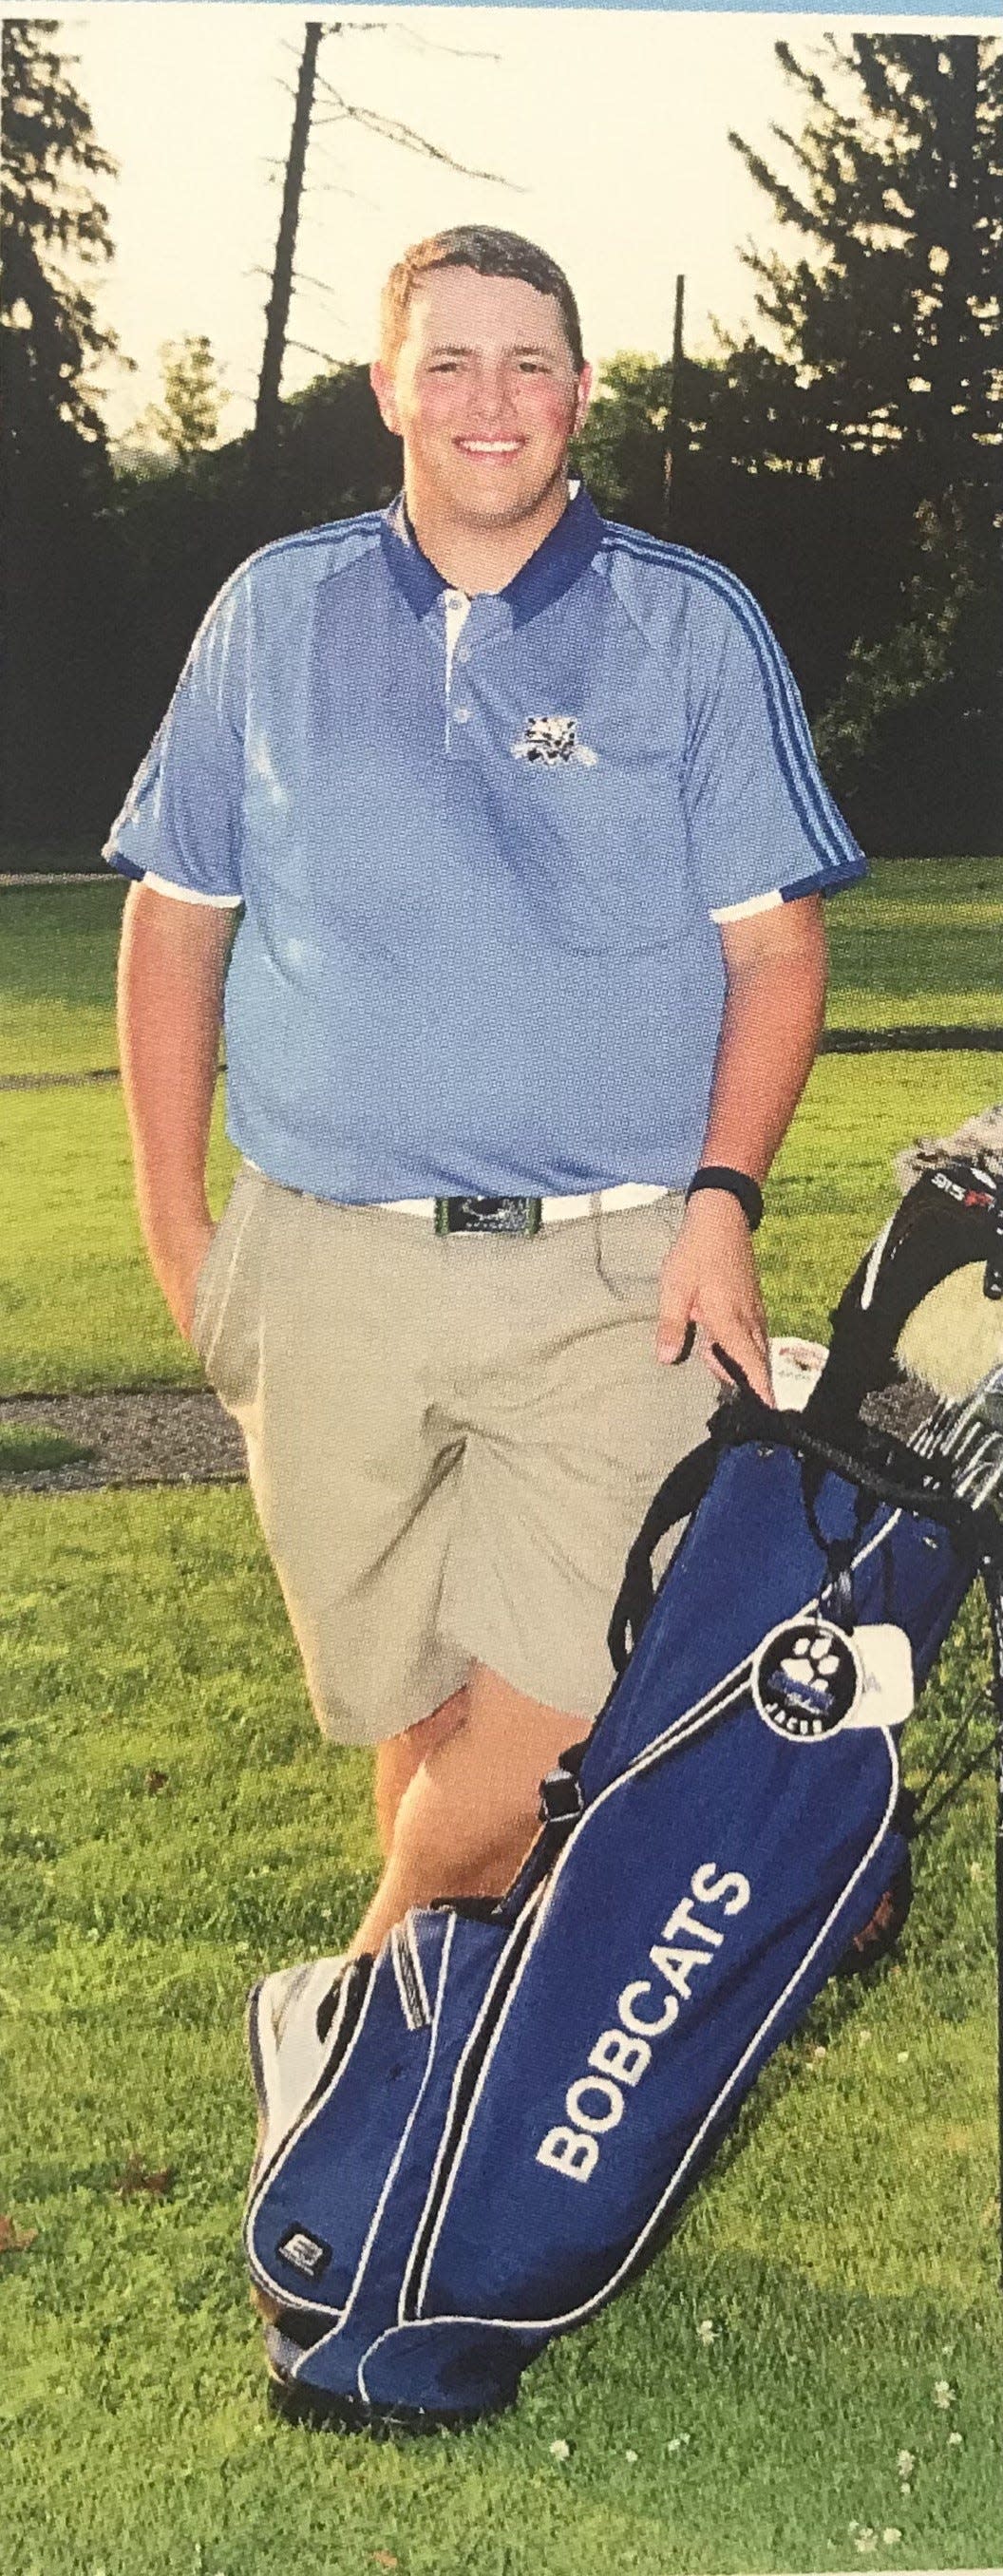 Cambridge High School recently hired CHS graduate Jake Feldner to take over the Bobcats' golf program as head coach after the retirement of long time head coach Kevin Smith. Feldner, a 2017 graduate was a successful member of the Cambridge golf program during his high school career.